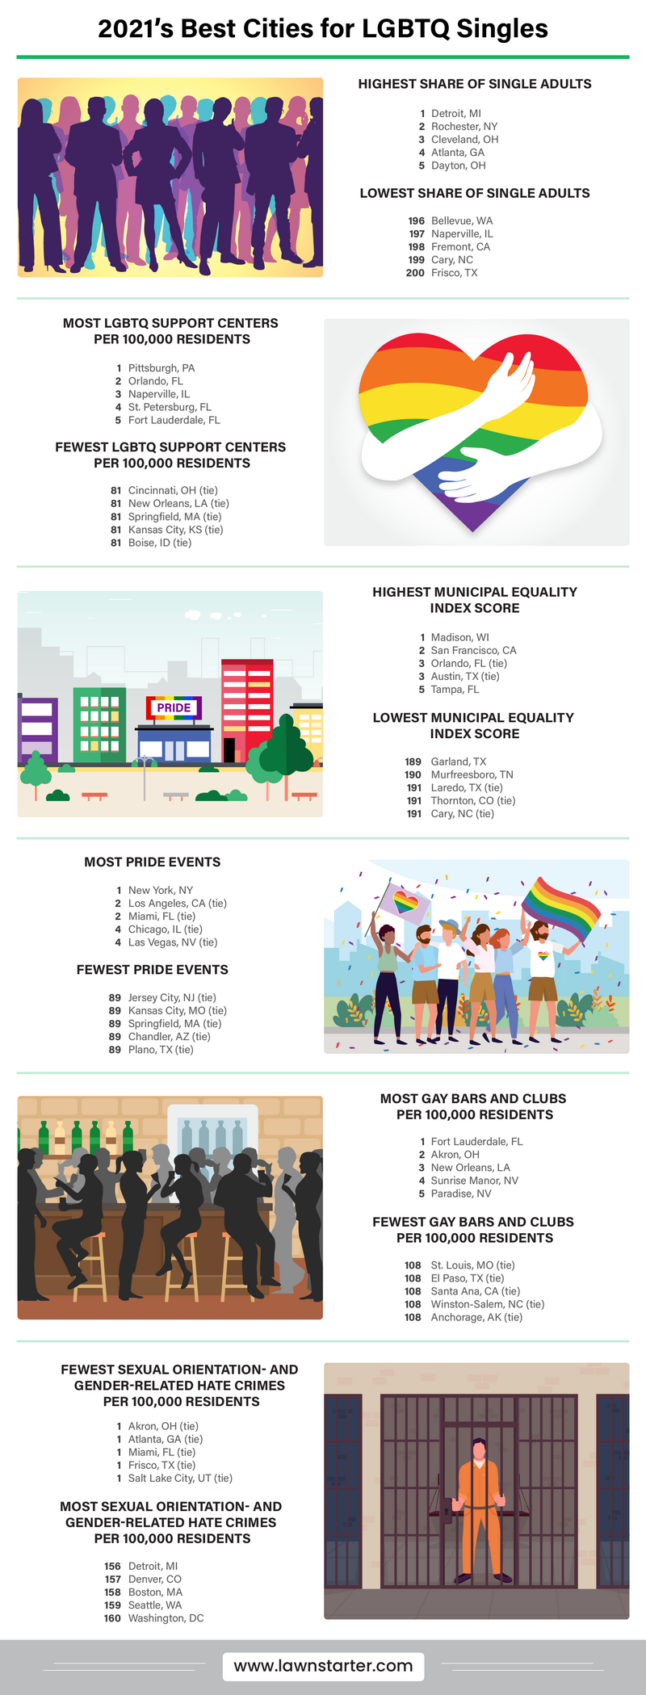 Infographic explaining highest and lowest scores of Cities, for various LGBTQ-related studies